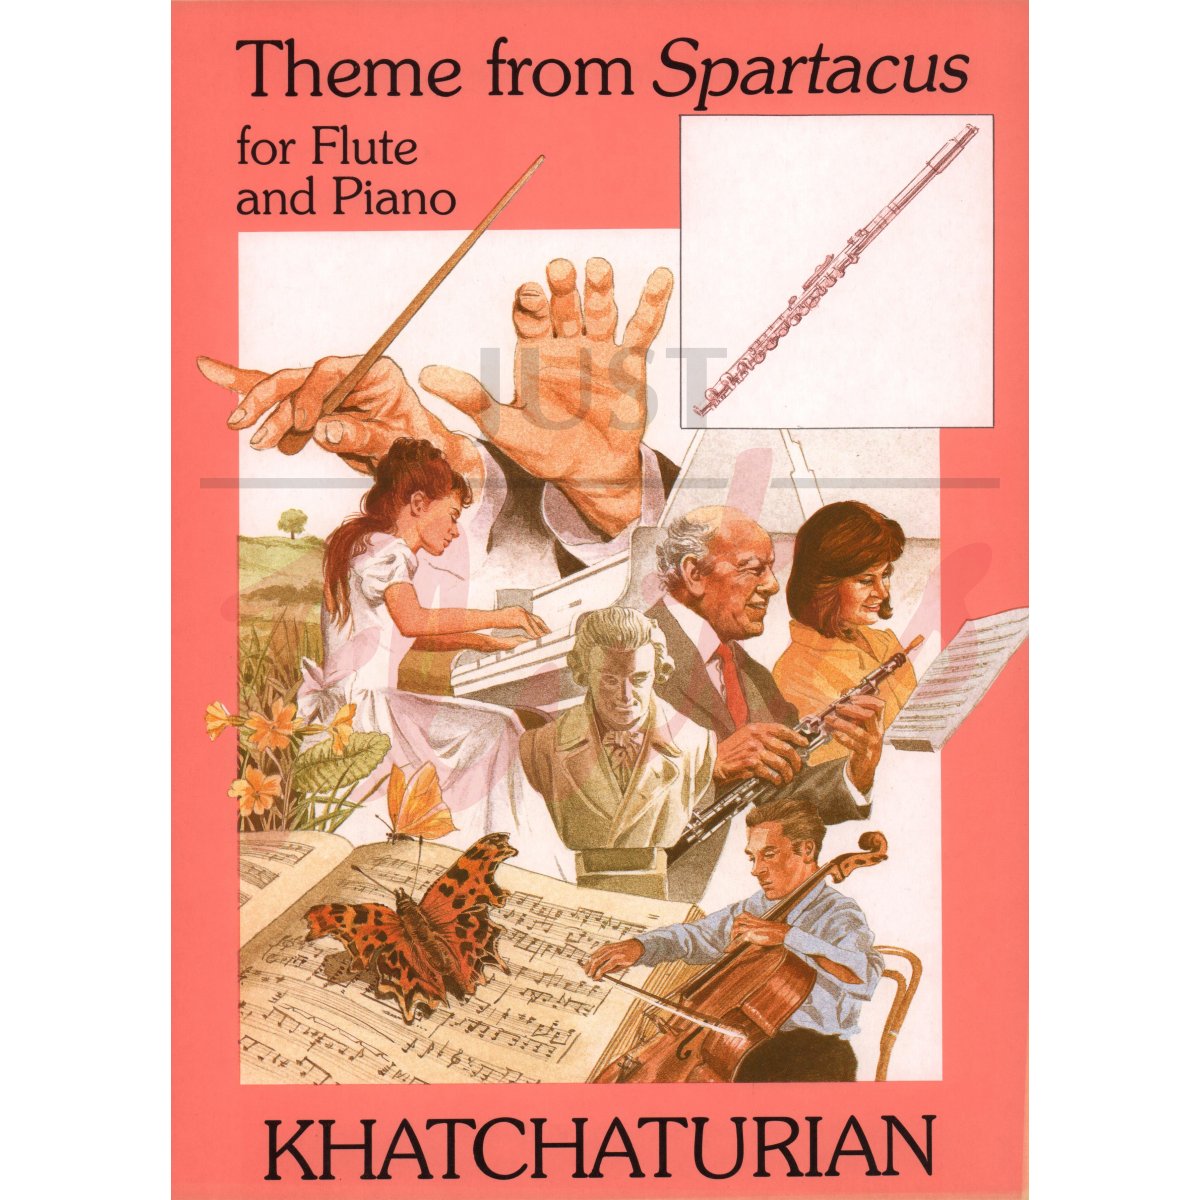 Theme from Spartacus for Flute and Piano